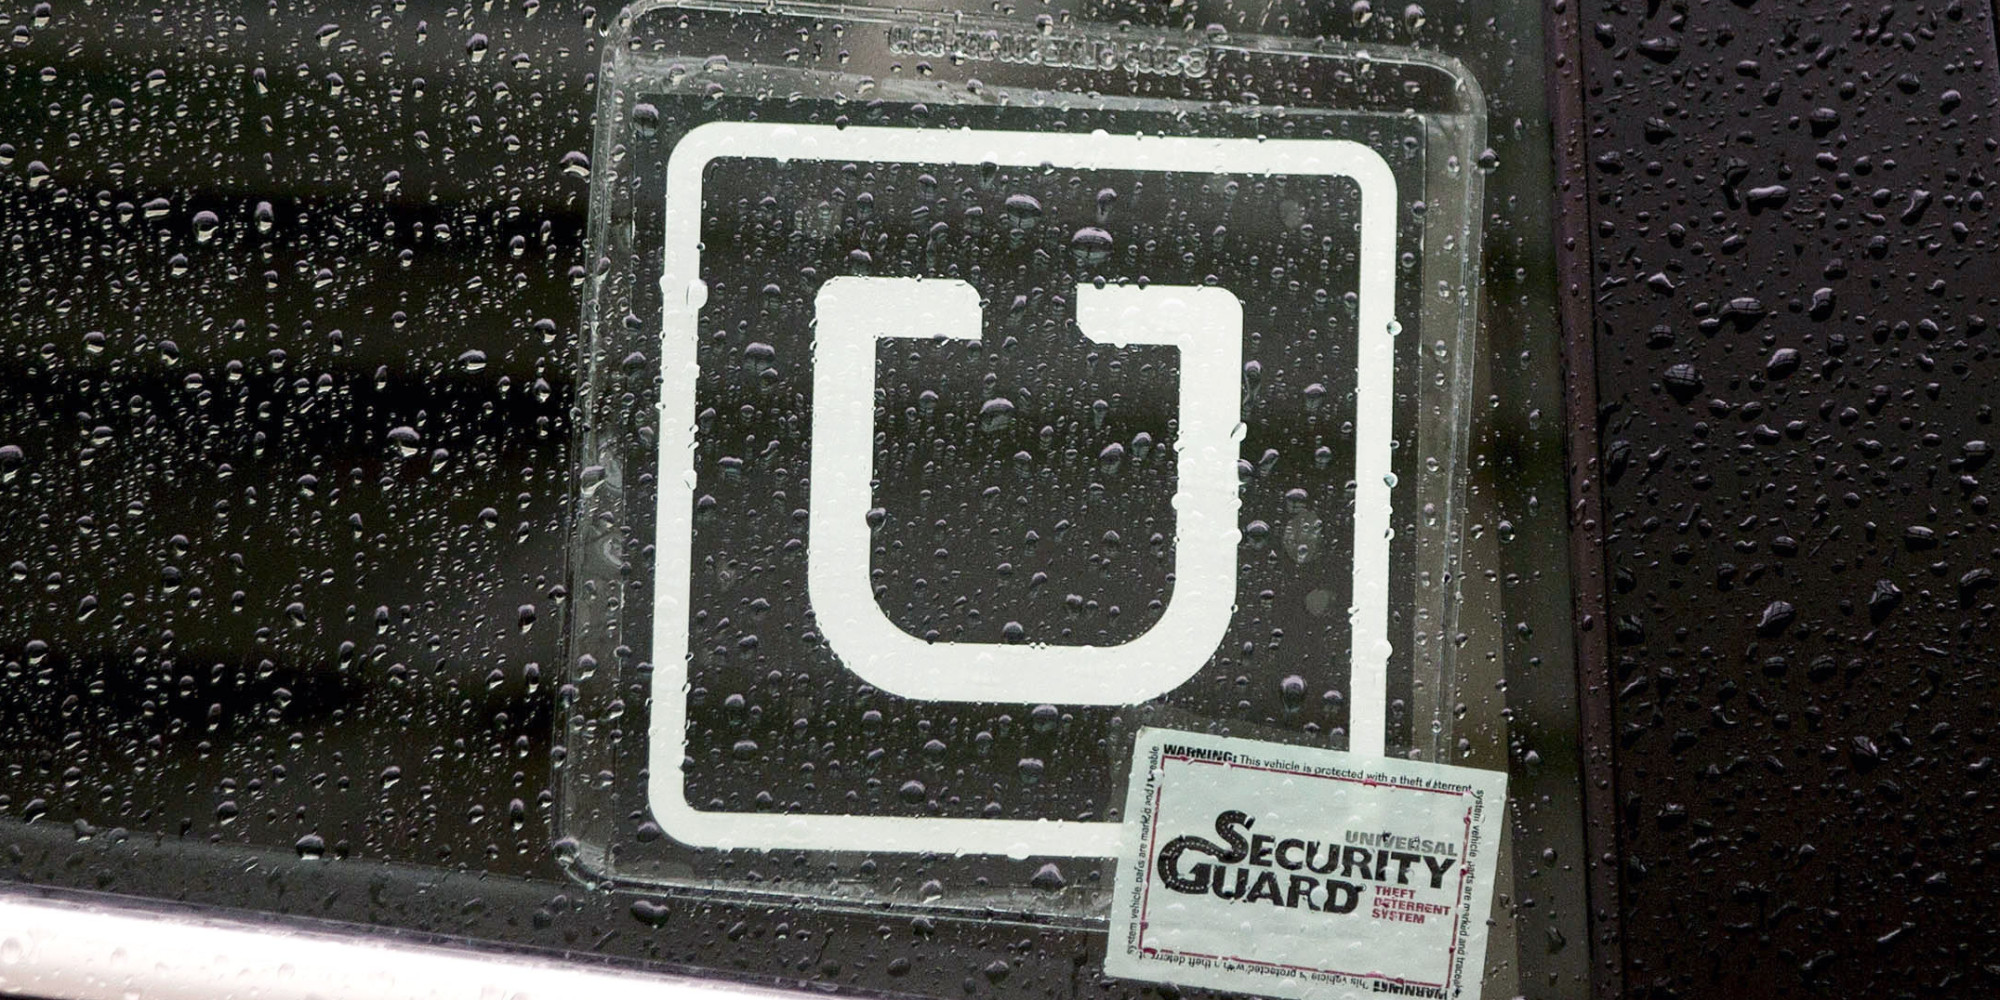 Uber Apologizes After Gay Couple Claims They Were Kicked Out Of Car For